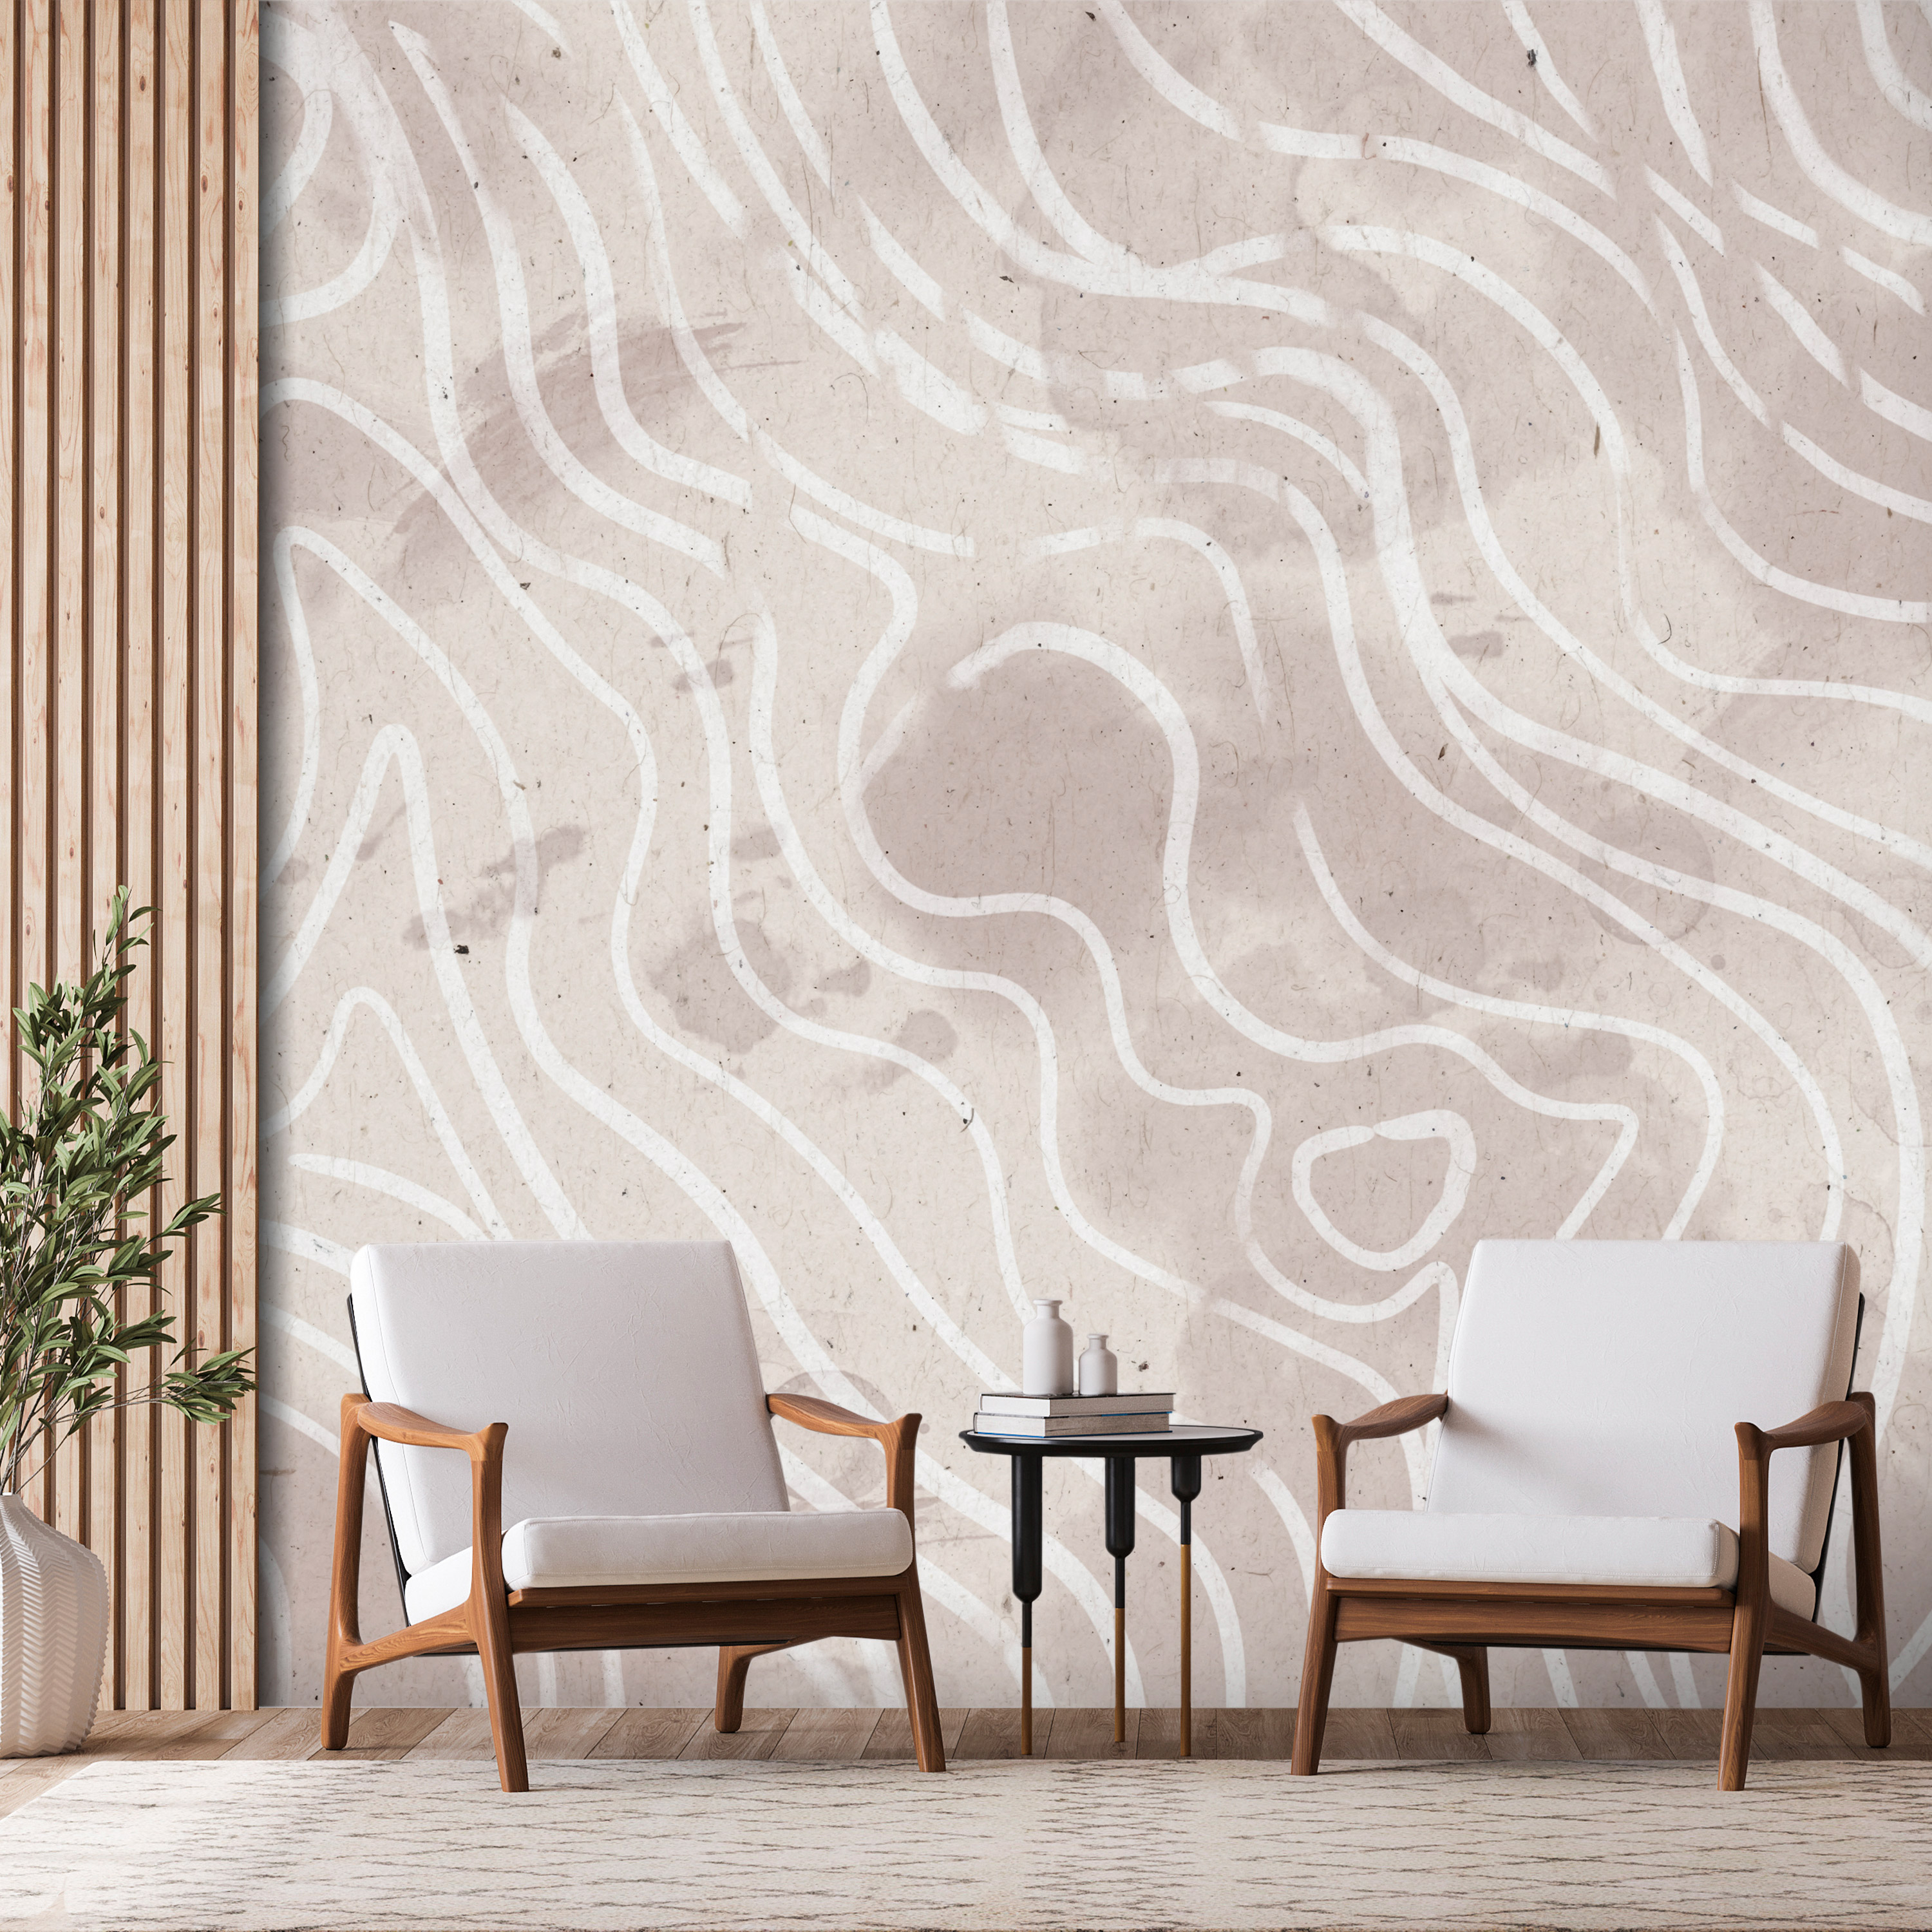 Self-adhesive Wallpaper - New Routes - 196x140